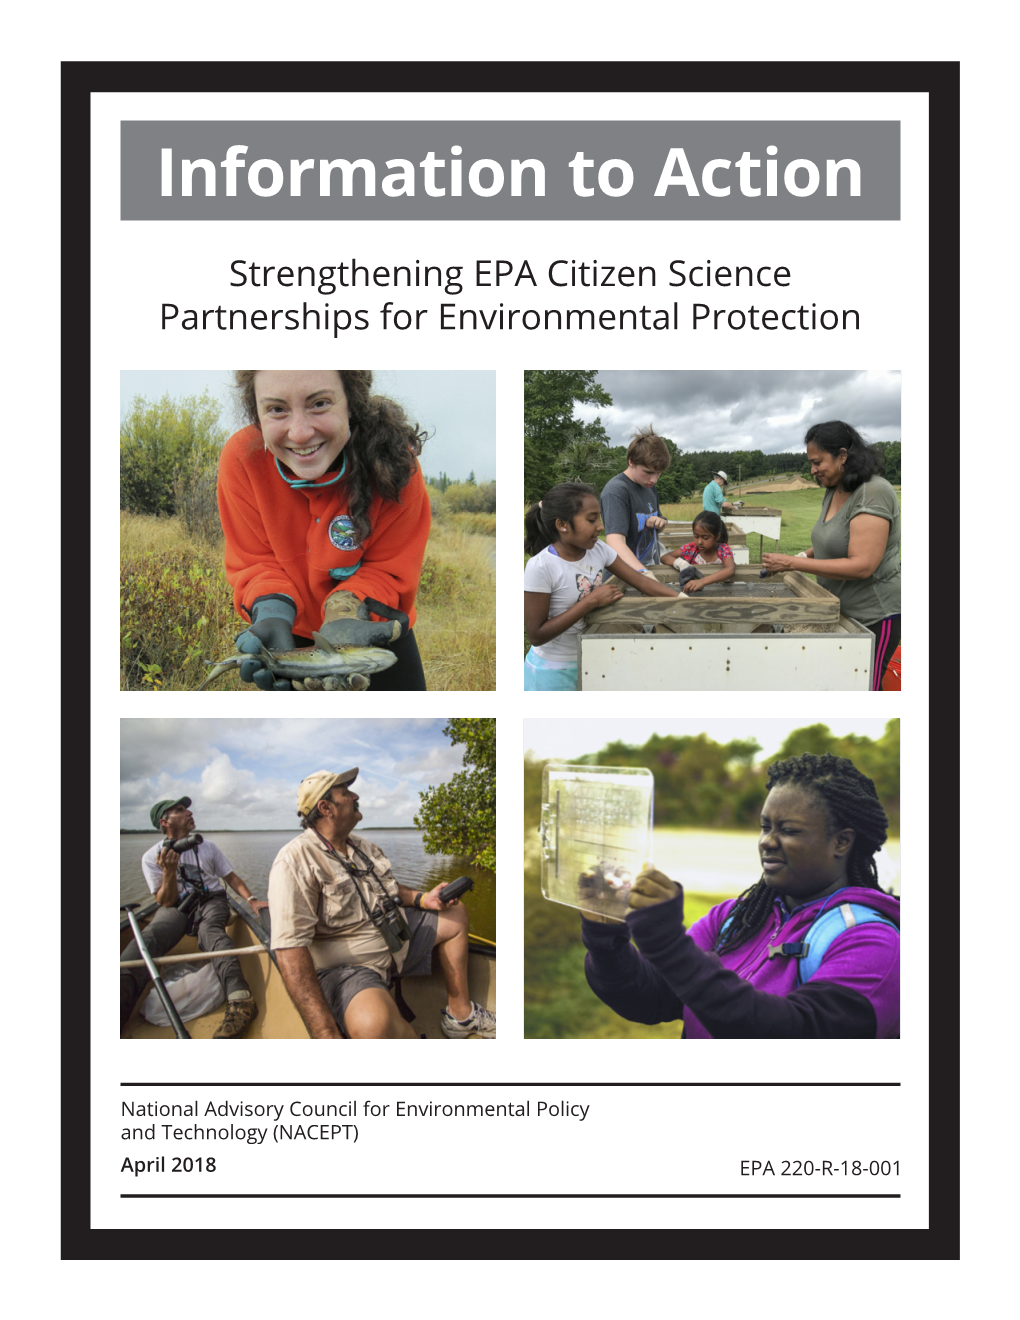 Information to Action: Strengthening EPA Citizen Science Partnerships for I Environmental Protection